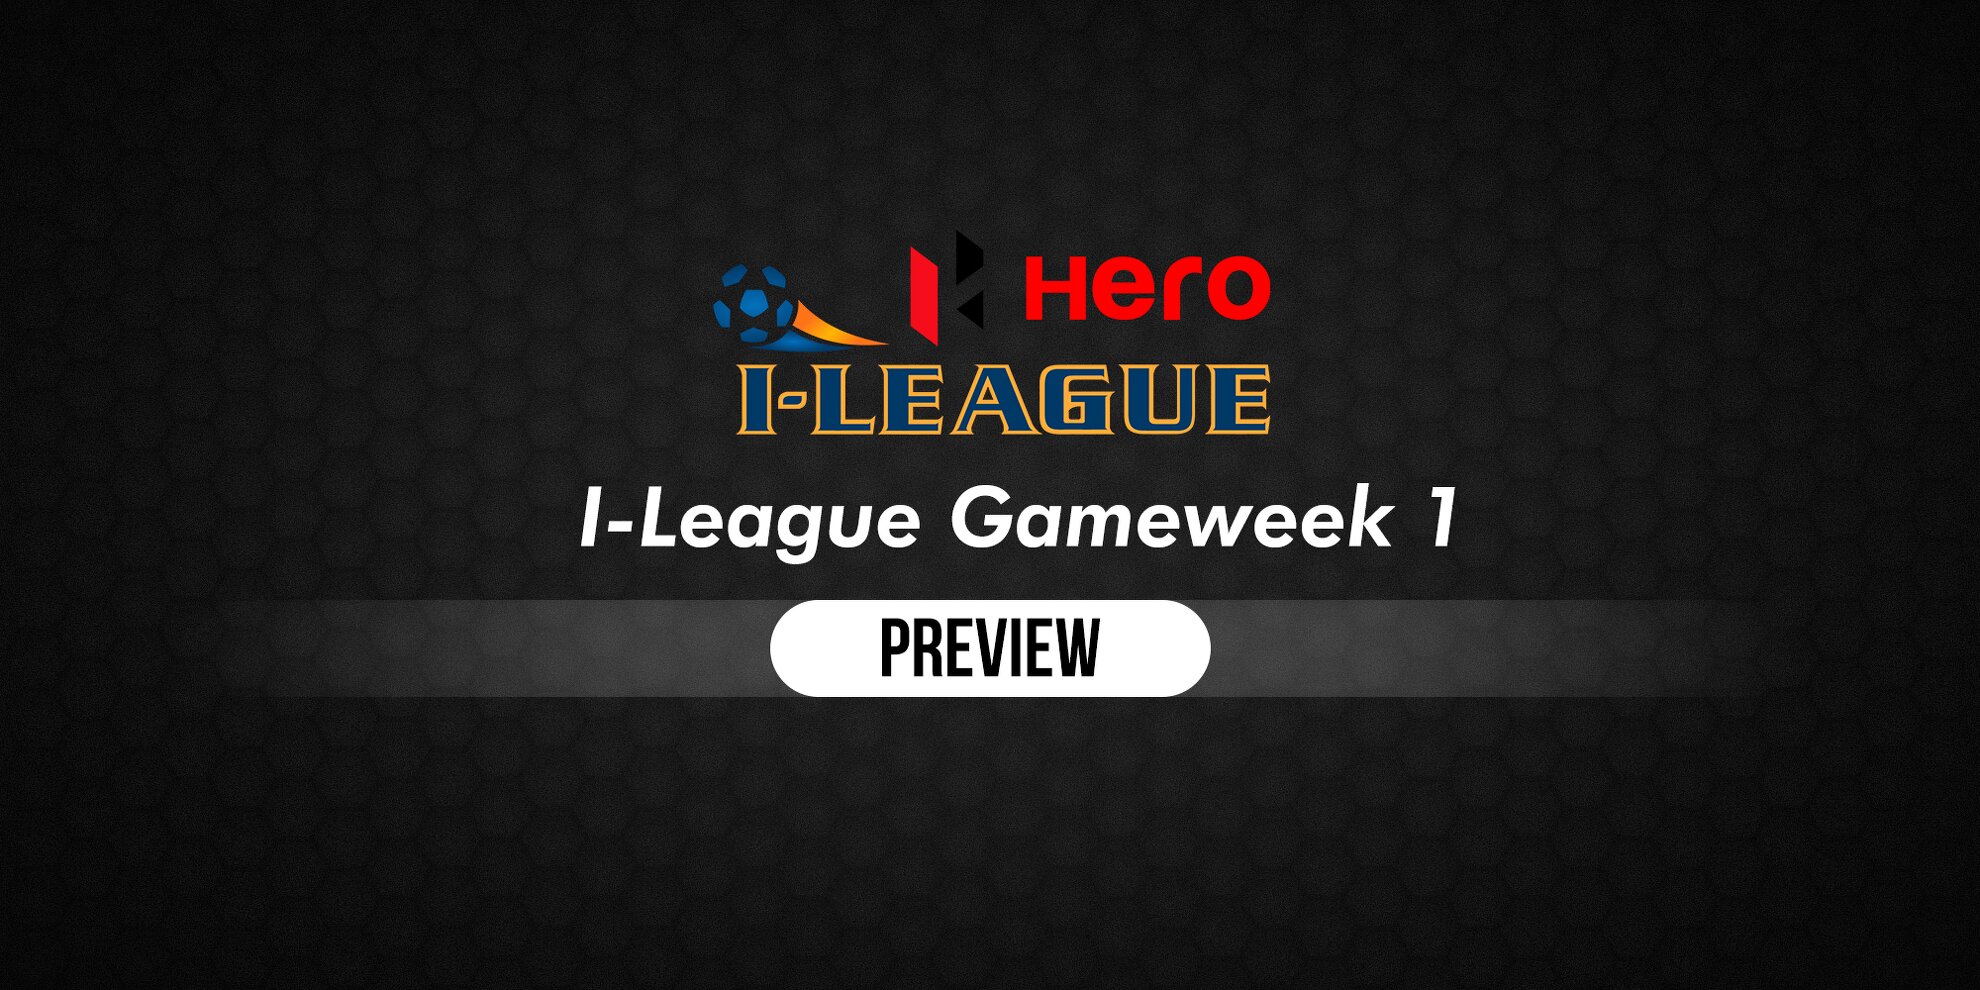 I-League 2019-20: Gameweek 1 Preview